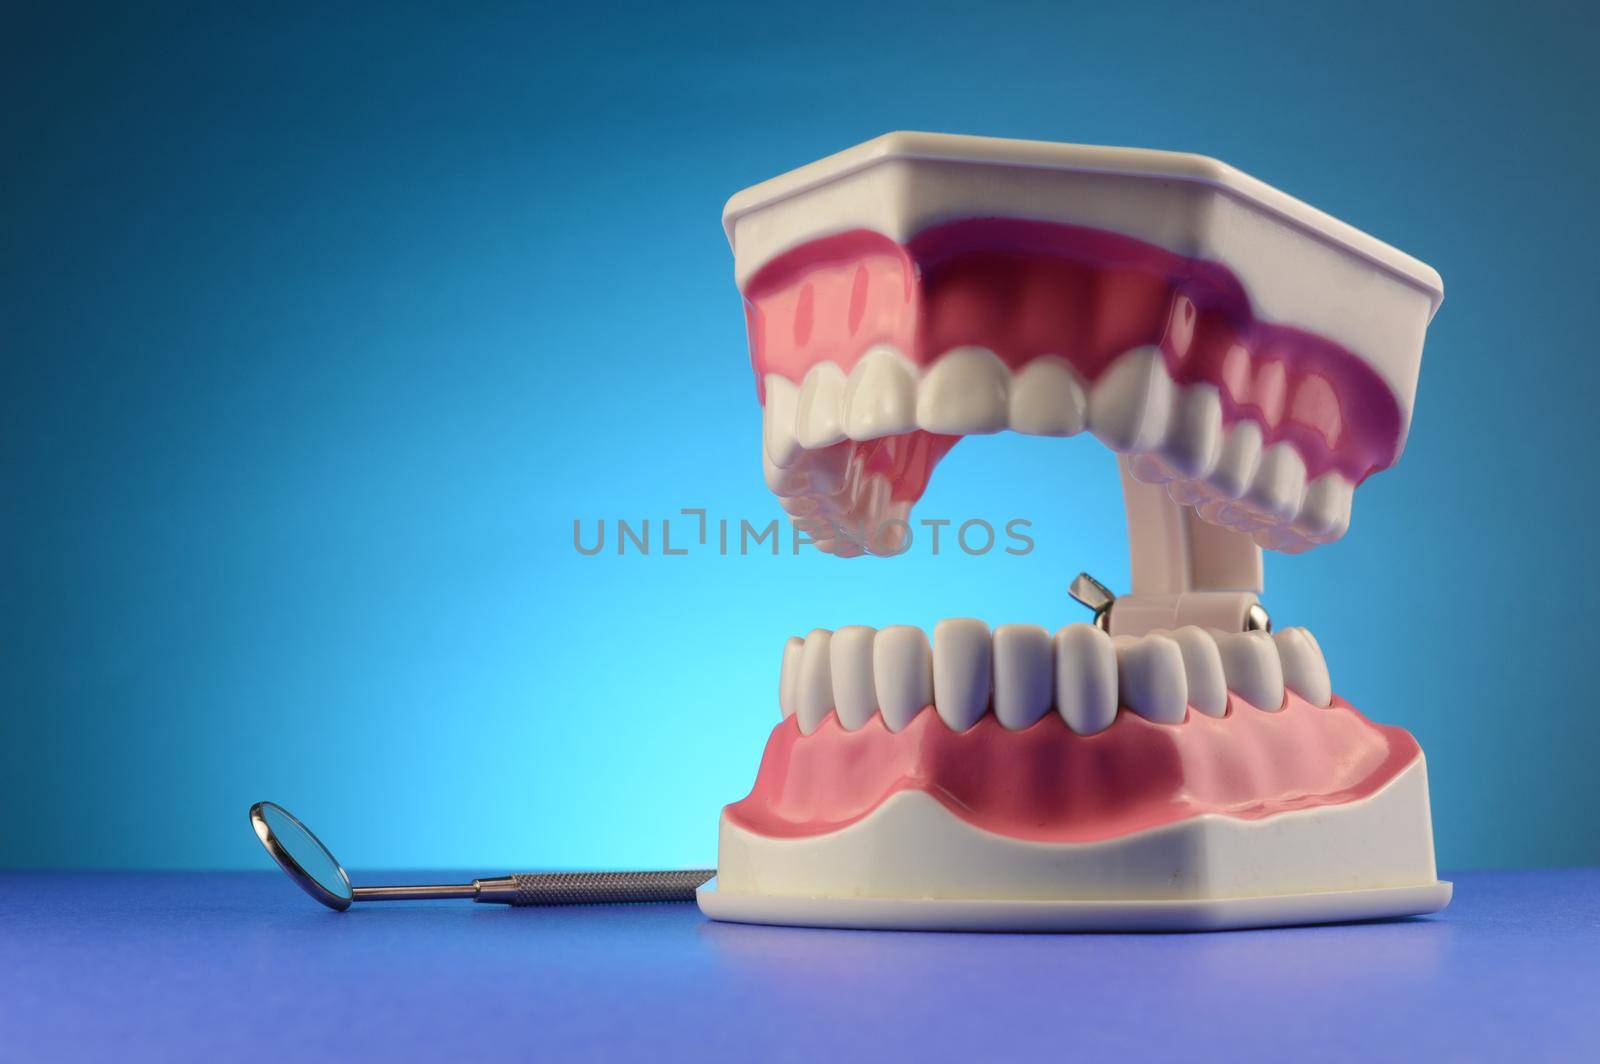 A display of dental teeth and a professional mouth mirror over blue for dentist purposes.